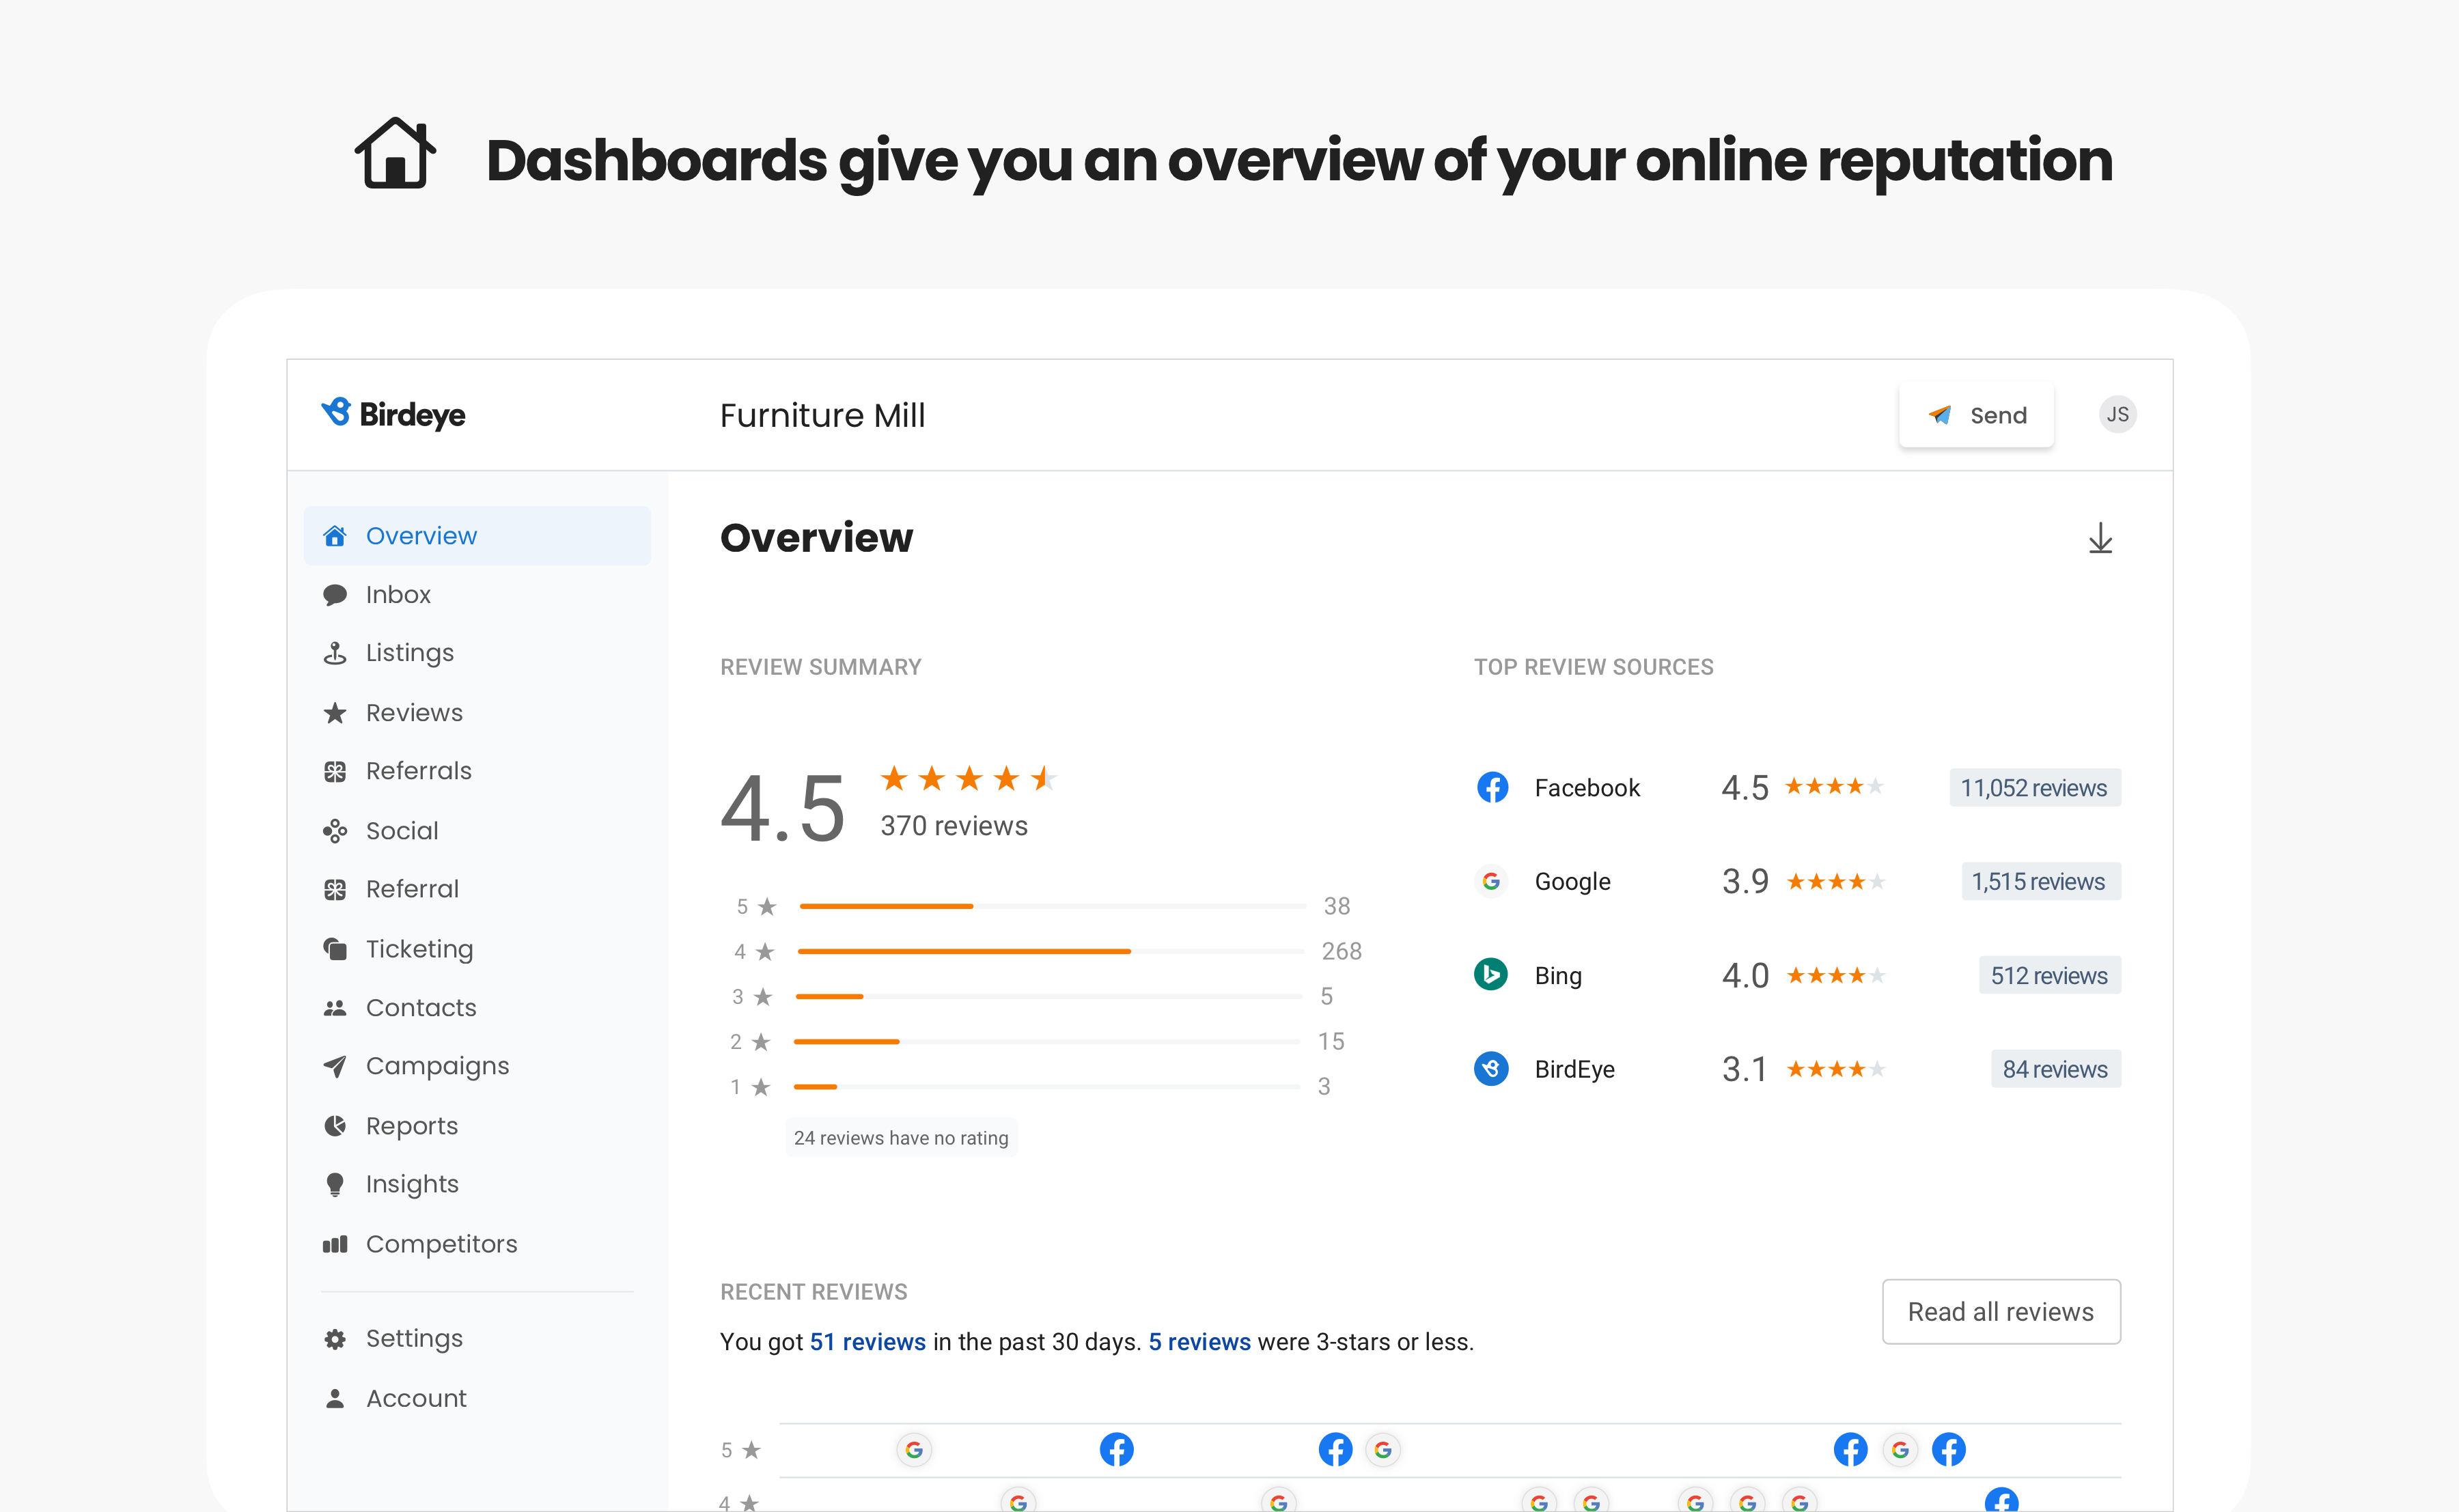 Birdeye Software - Dashboards - Gives you an overview of your online reputation